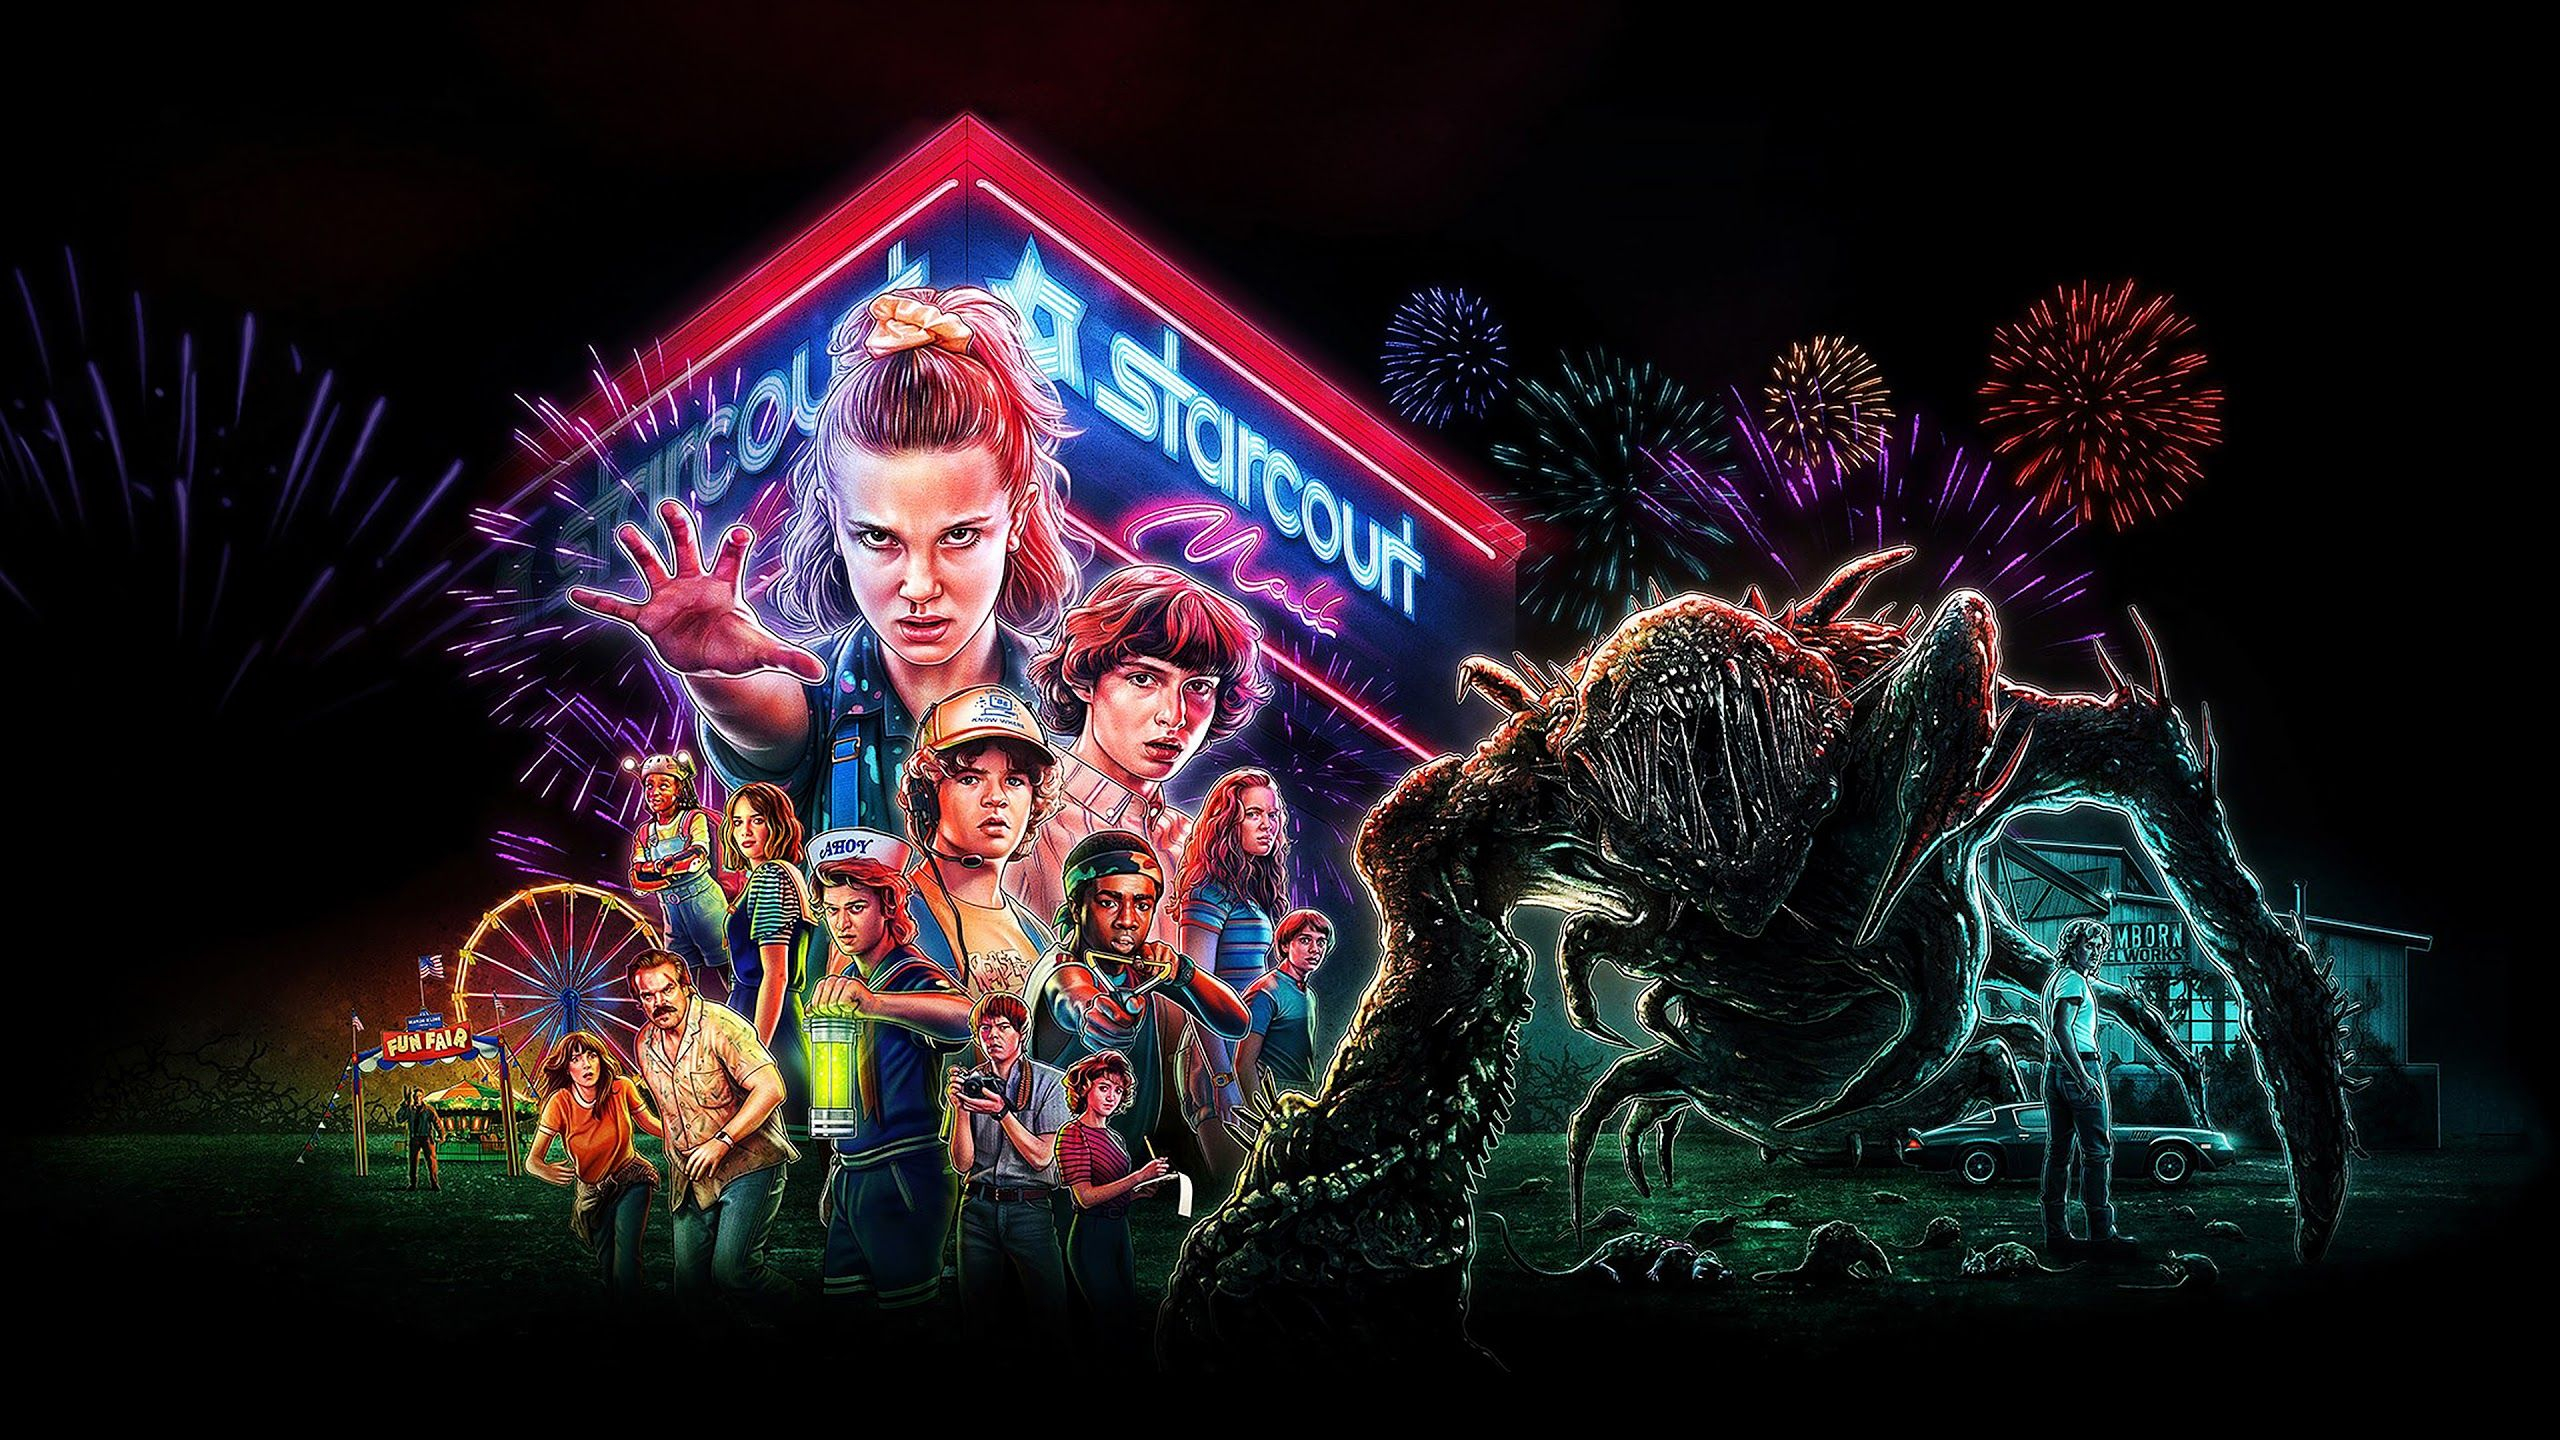 2560x1440 Stranger Things Poster Wallpapers Top Free Stranger Things Poster Backgrounds